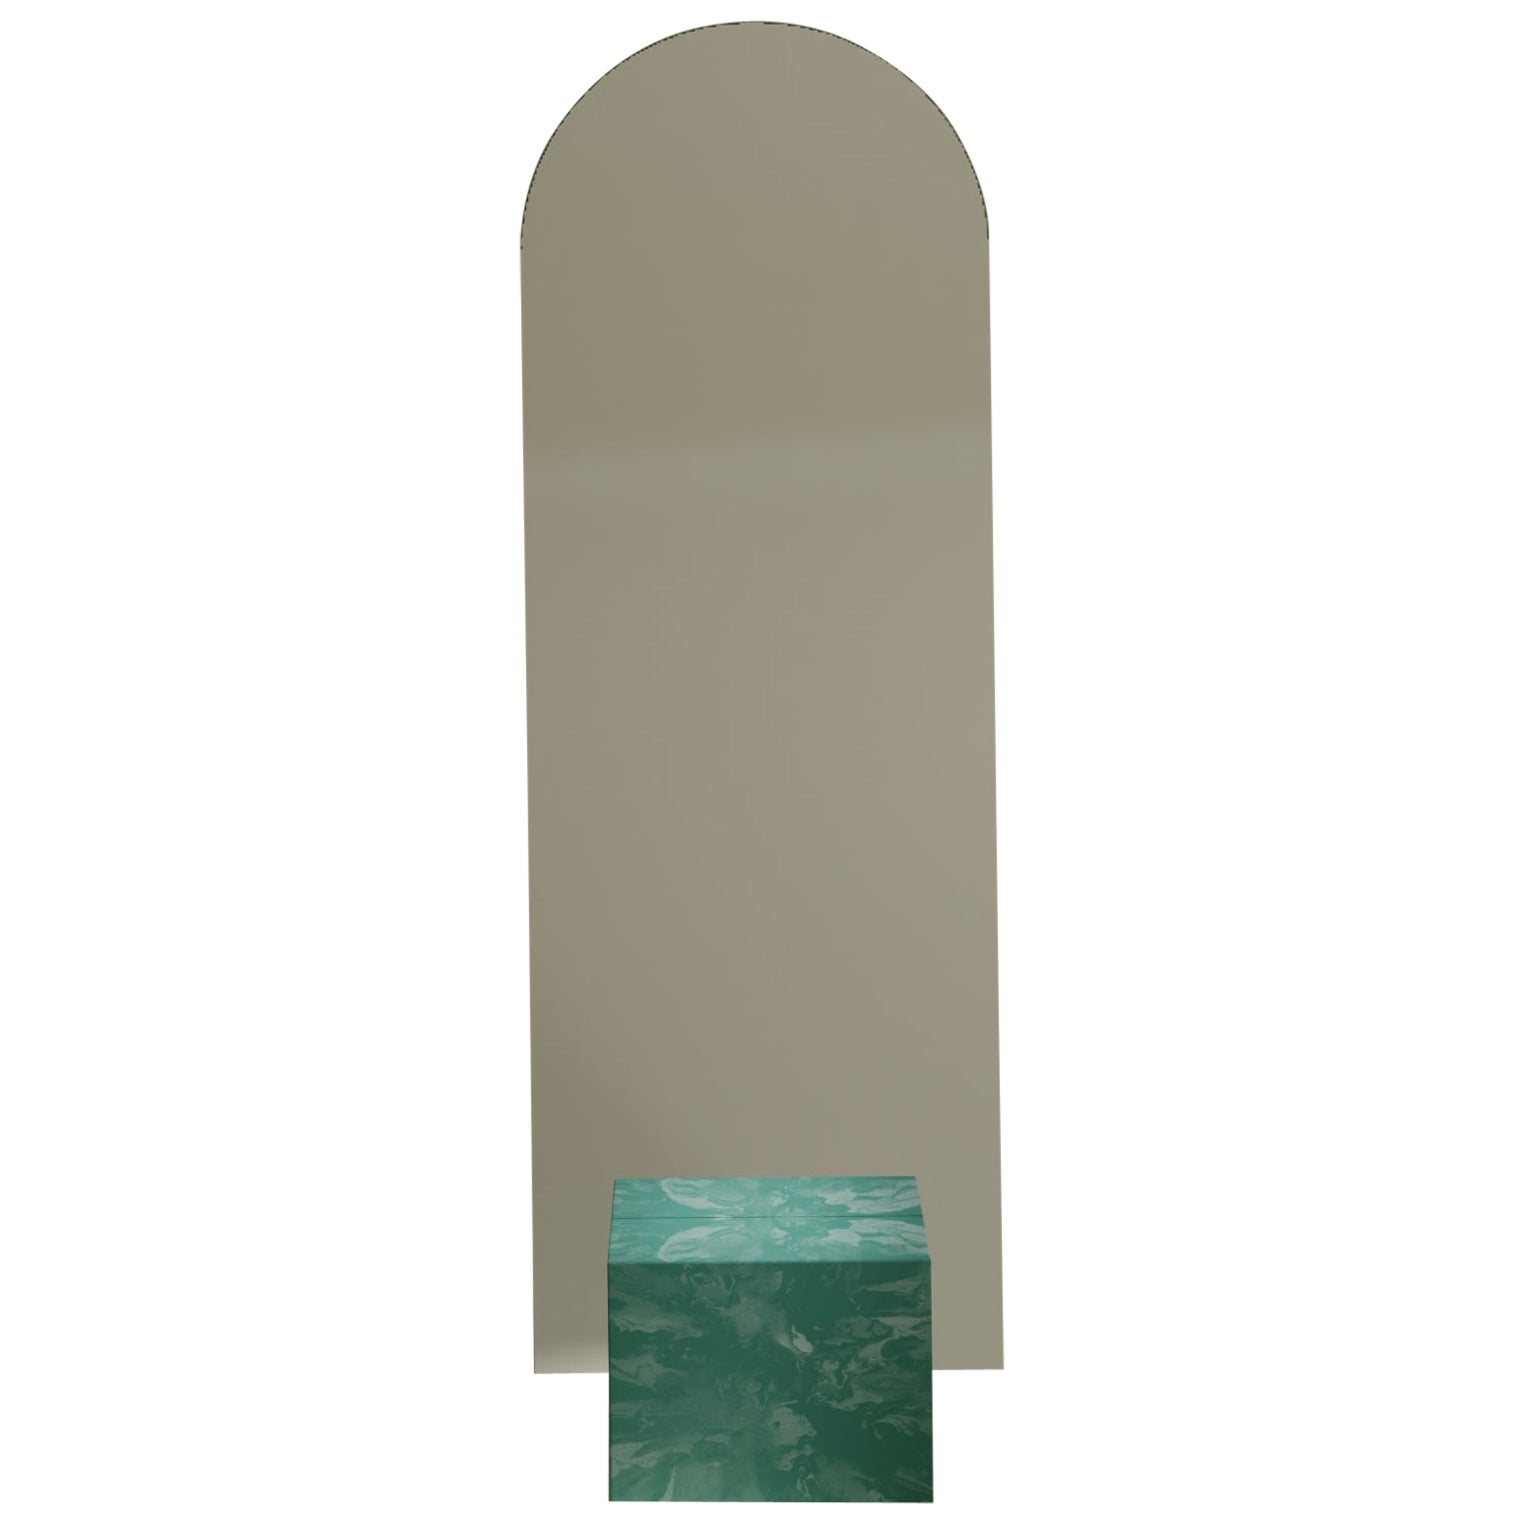 Green Standing Mirror handcrafted from 100% Recycled Plastic by Anqa Studios For Sale